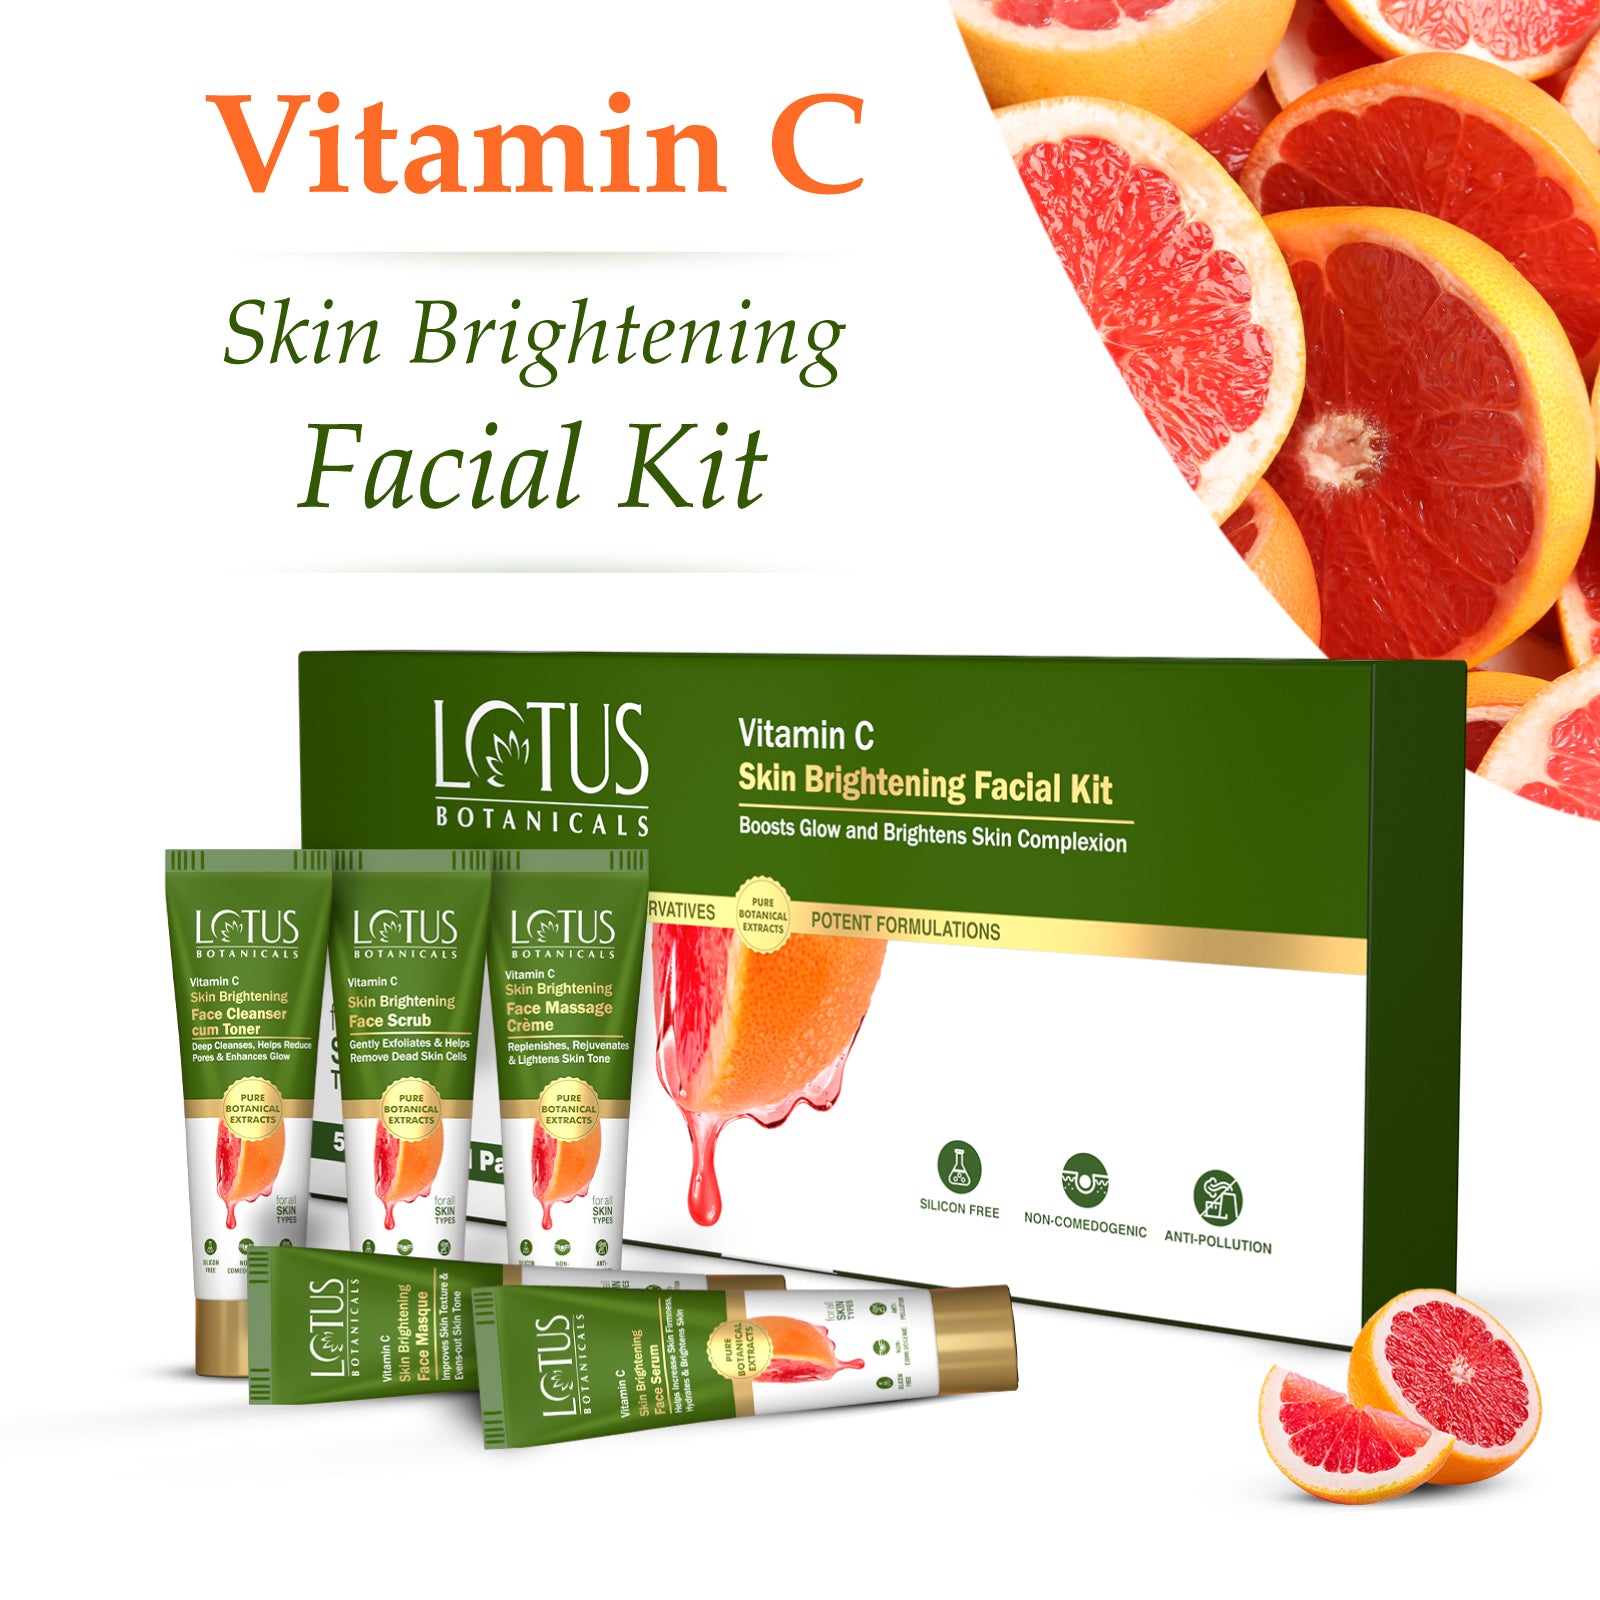 Vitamin C Skin Brightening Facial Kit - Illuminate and Revitalize Your Skin with this Powerful Antioxidant Formula